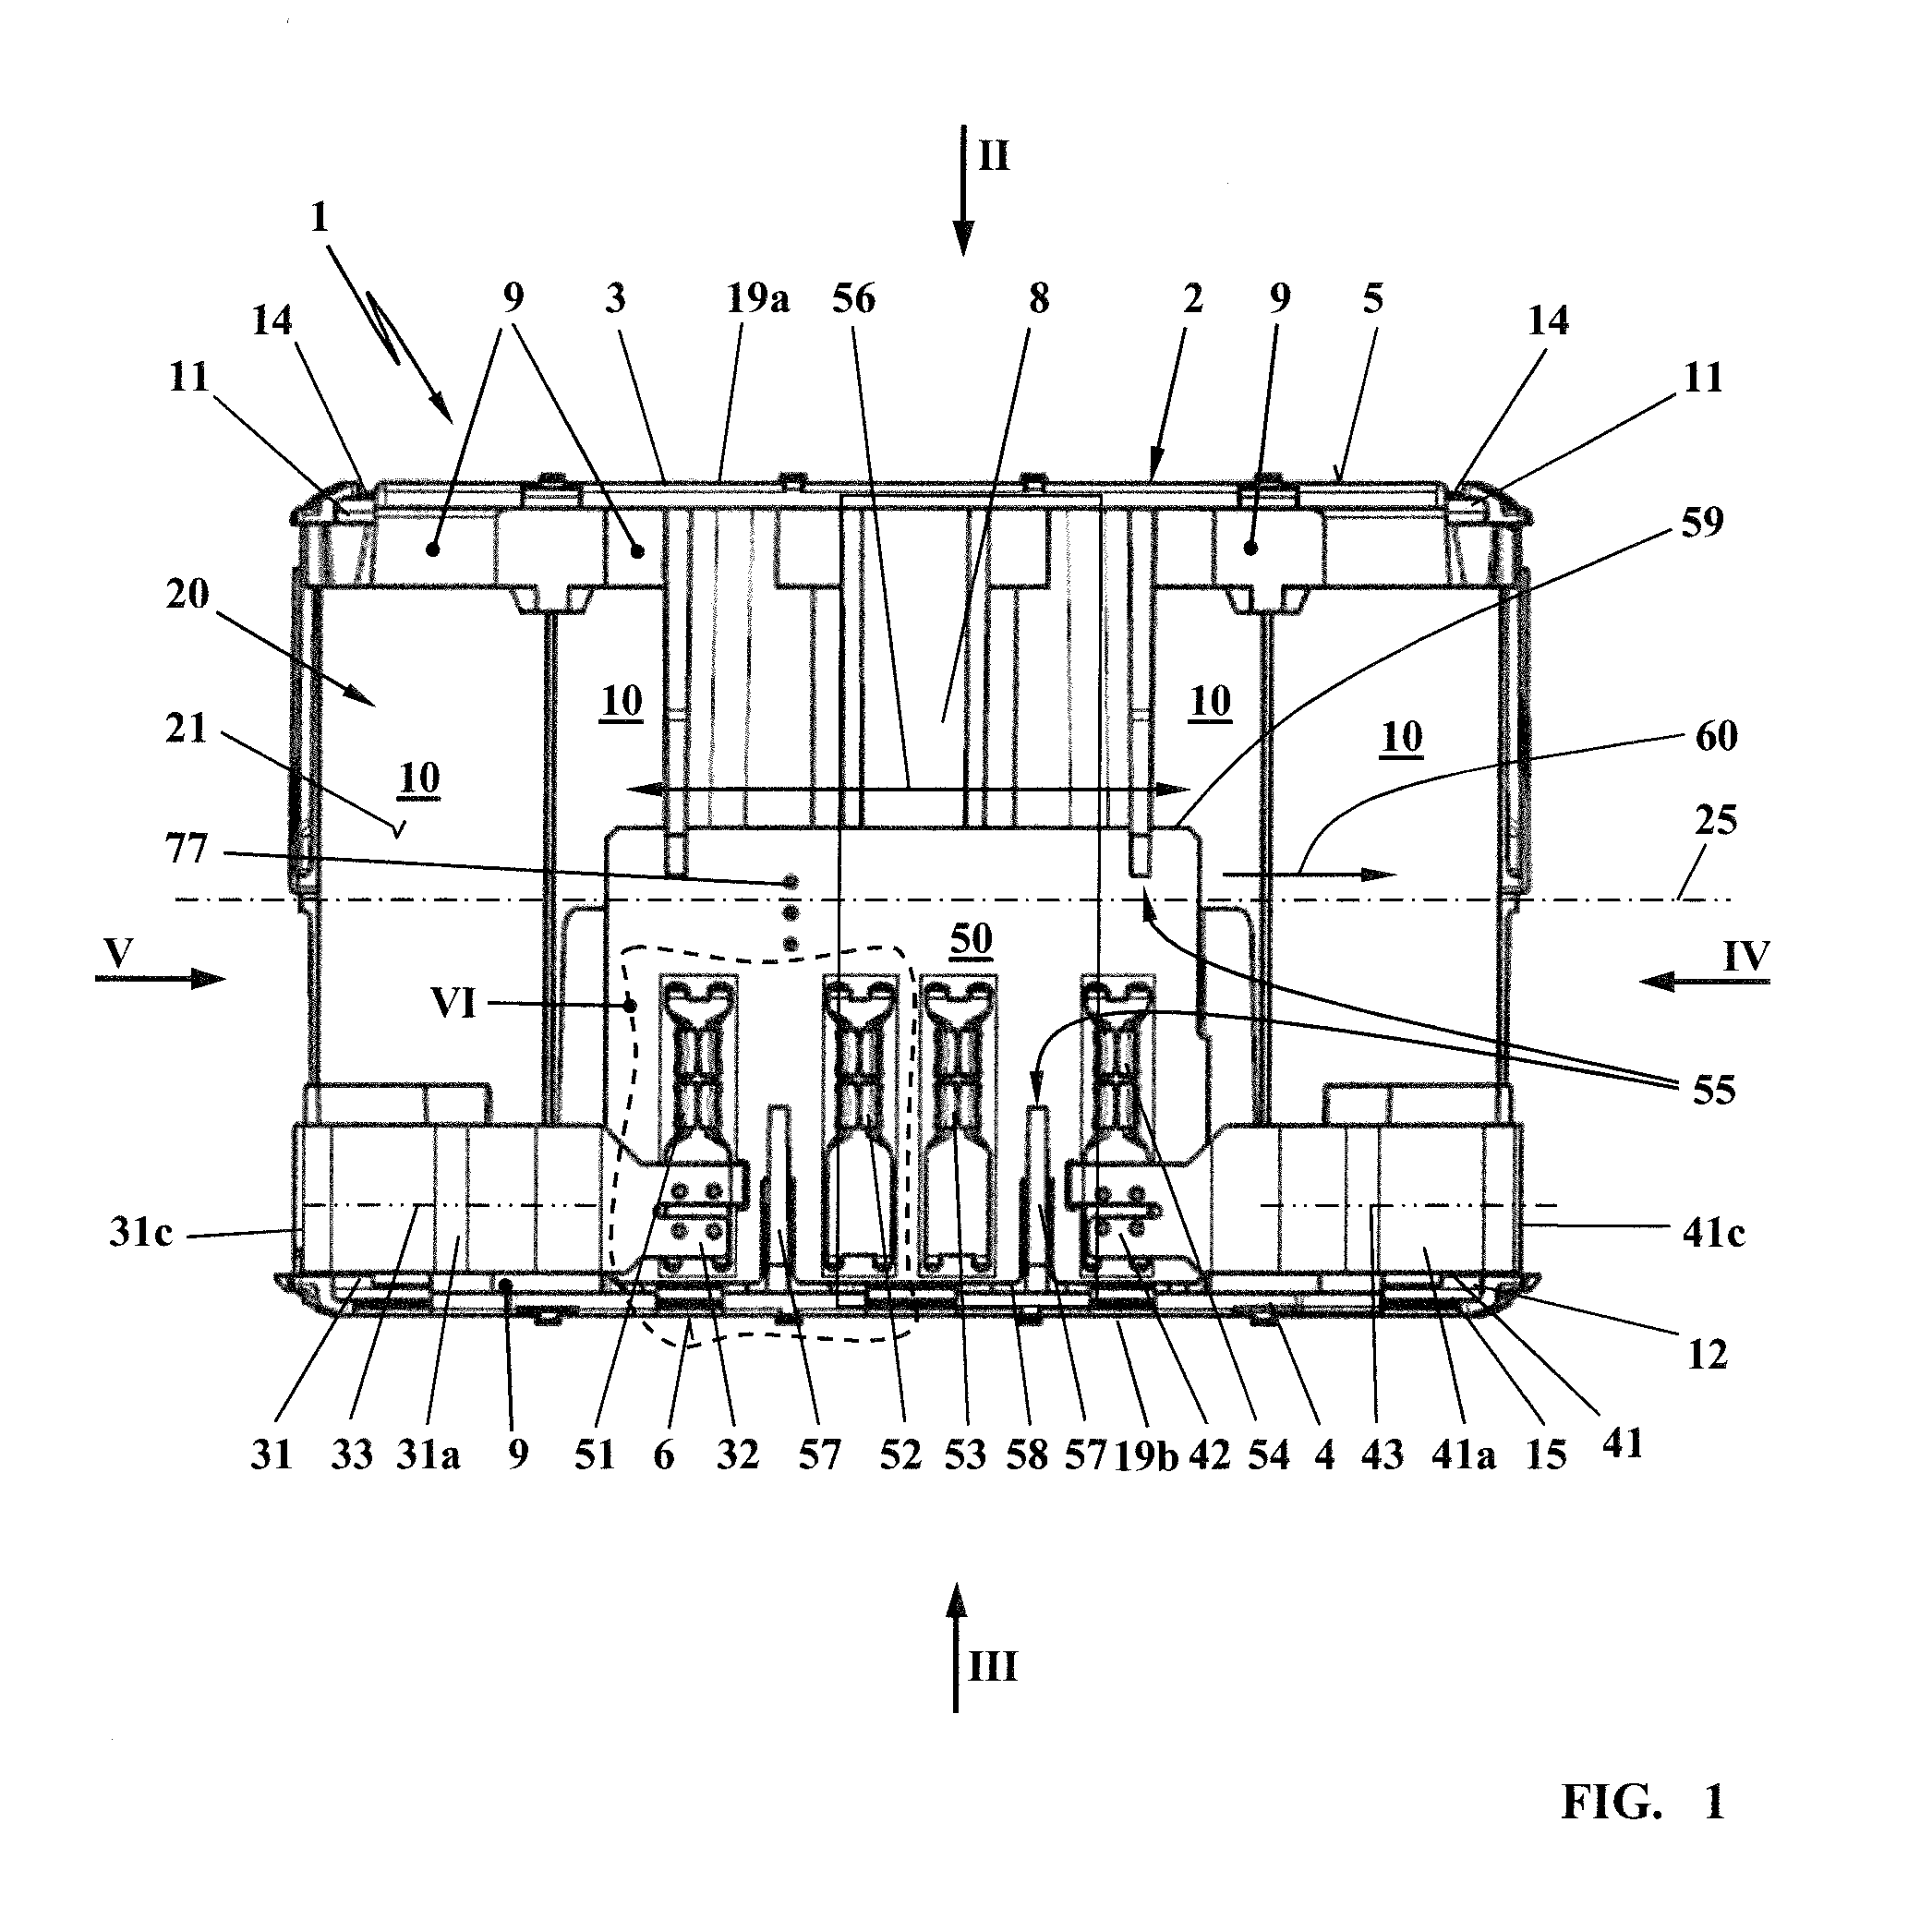 Rechargeable battery pack having a contact plate for connection to a load